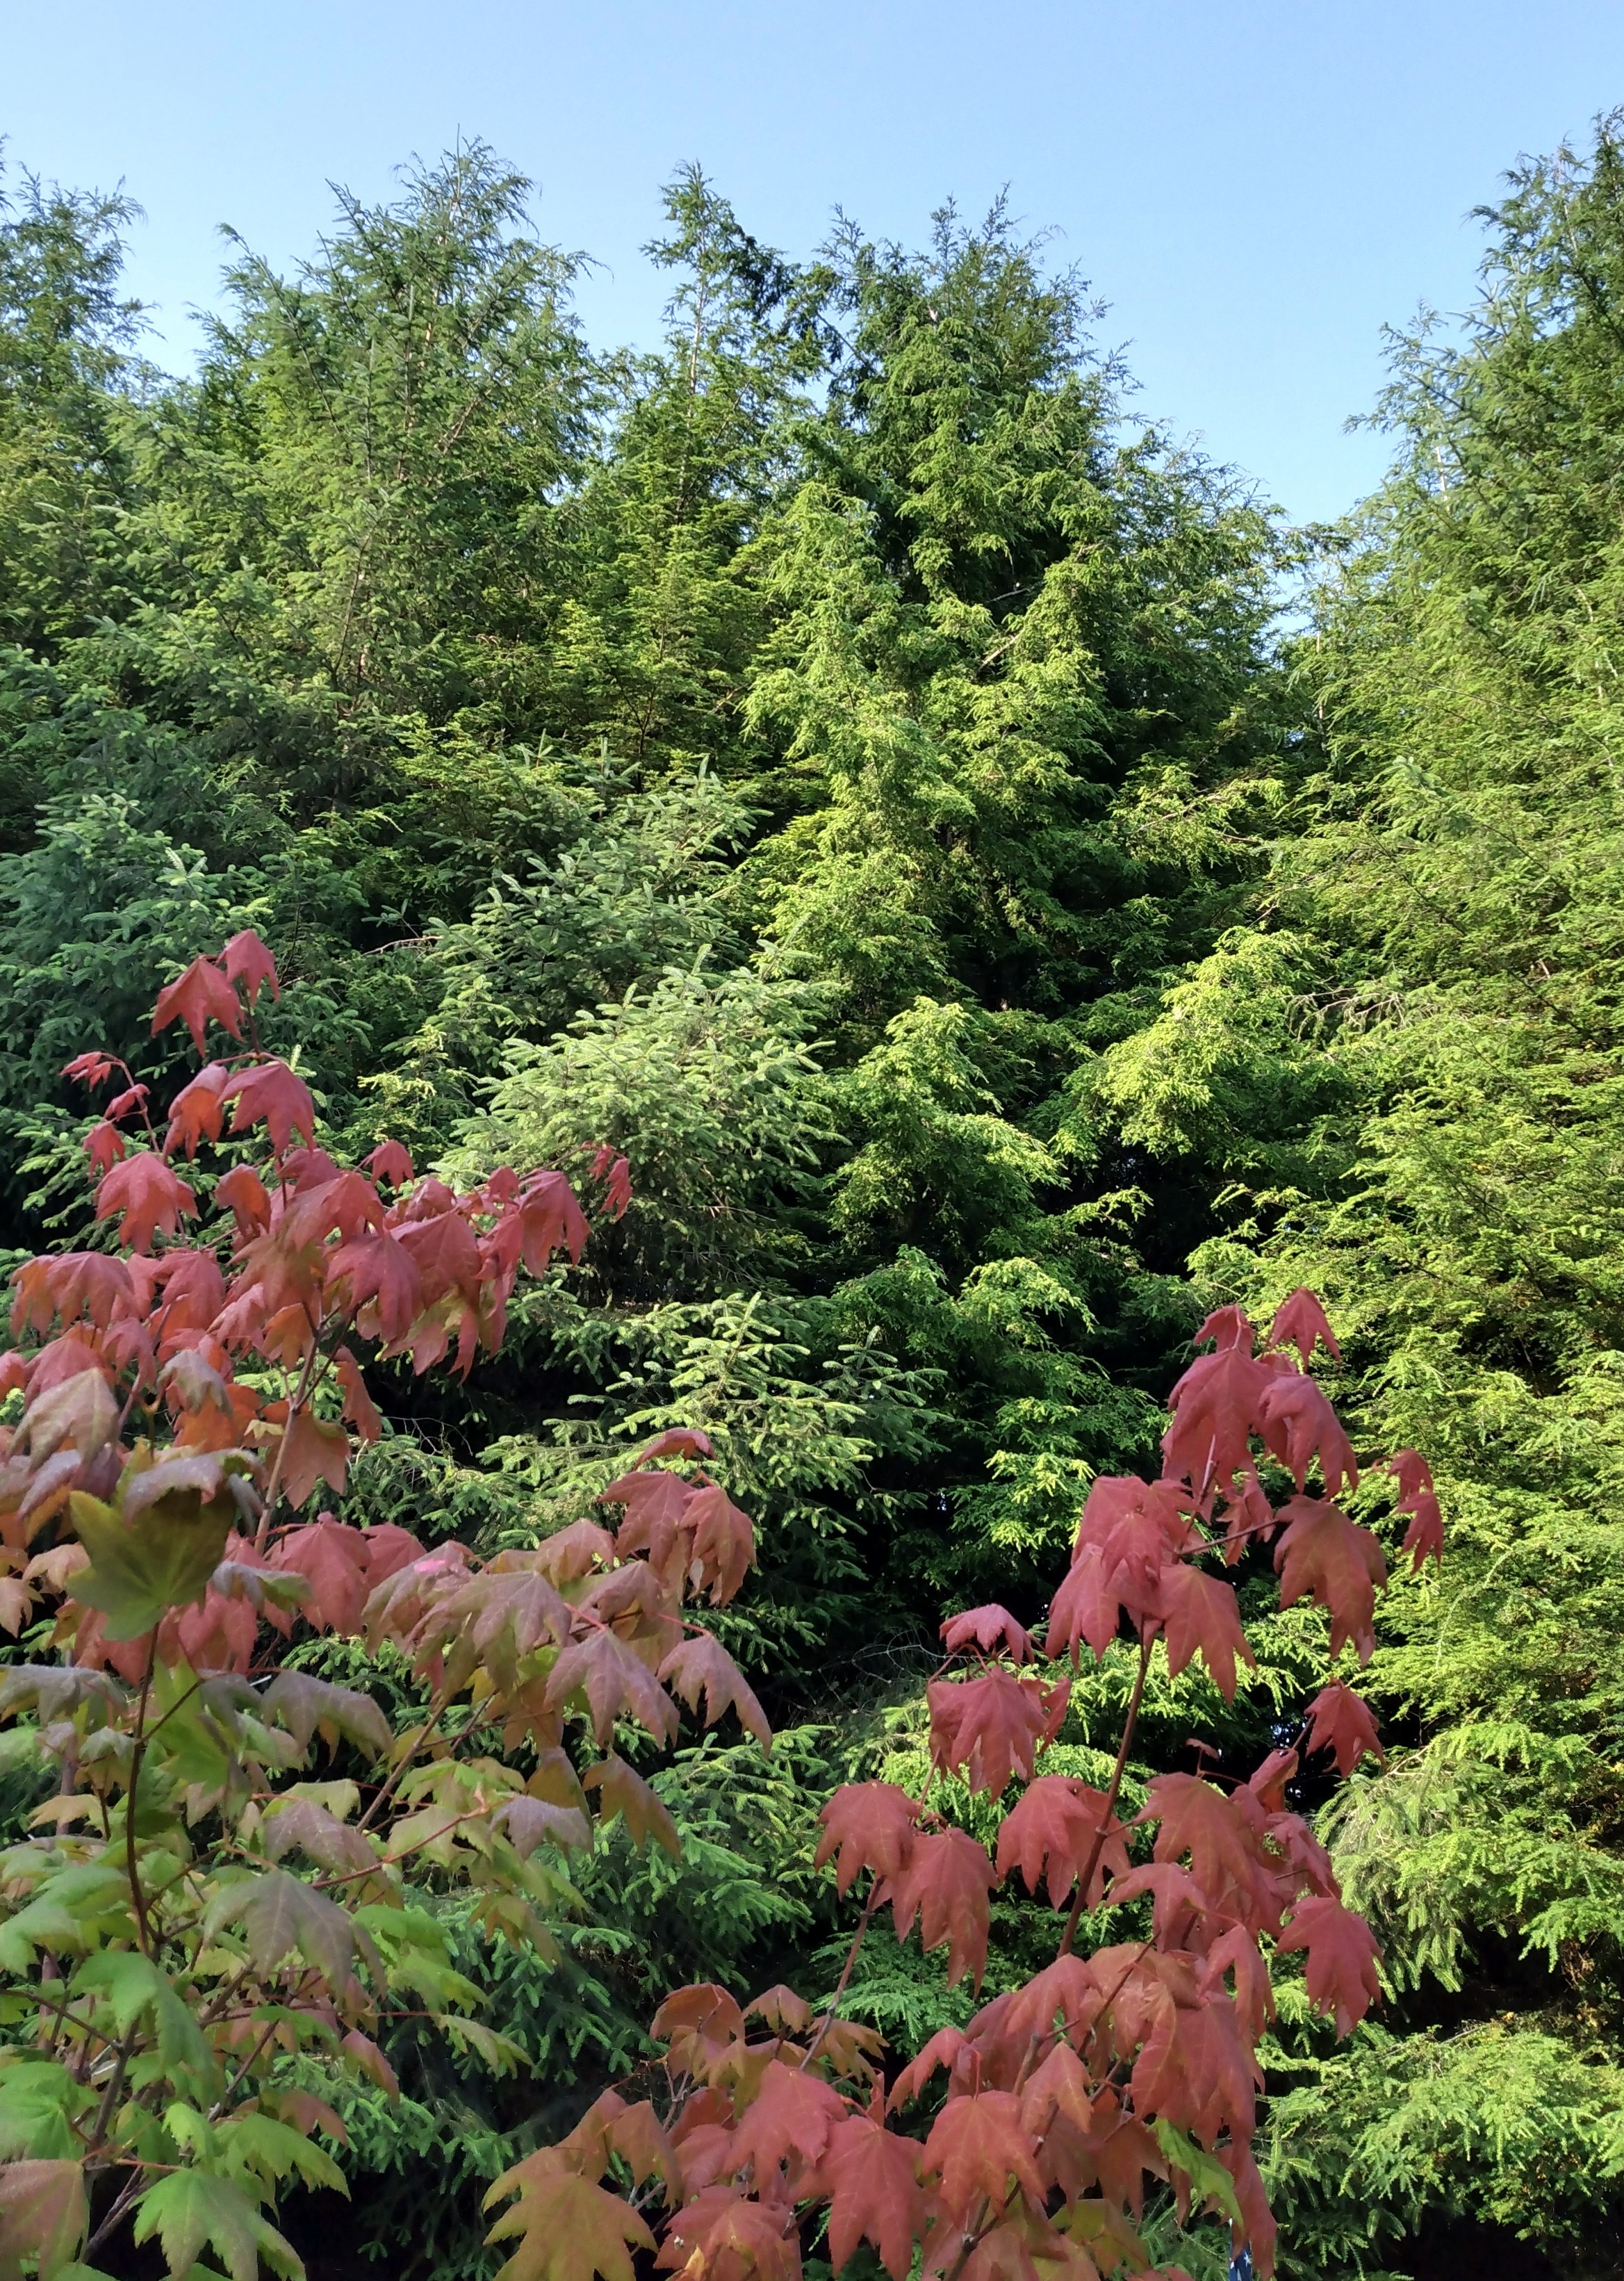 A background of green trees, mixed conifers and deciduous, but in the foreground a few branches of a maple with all the leaves changed to flame-red